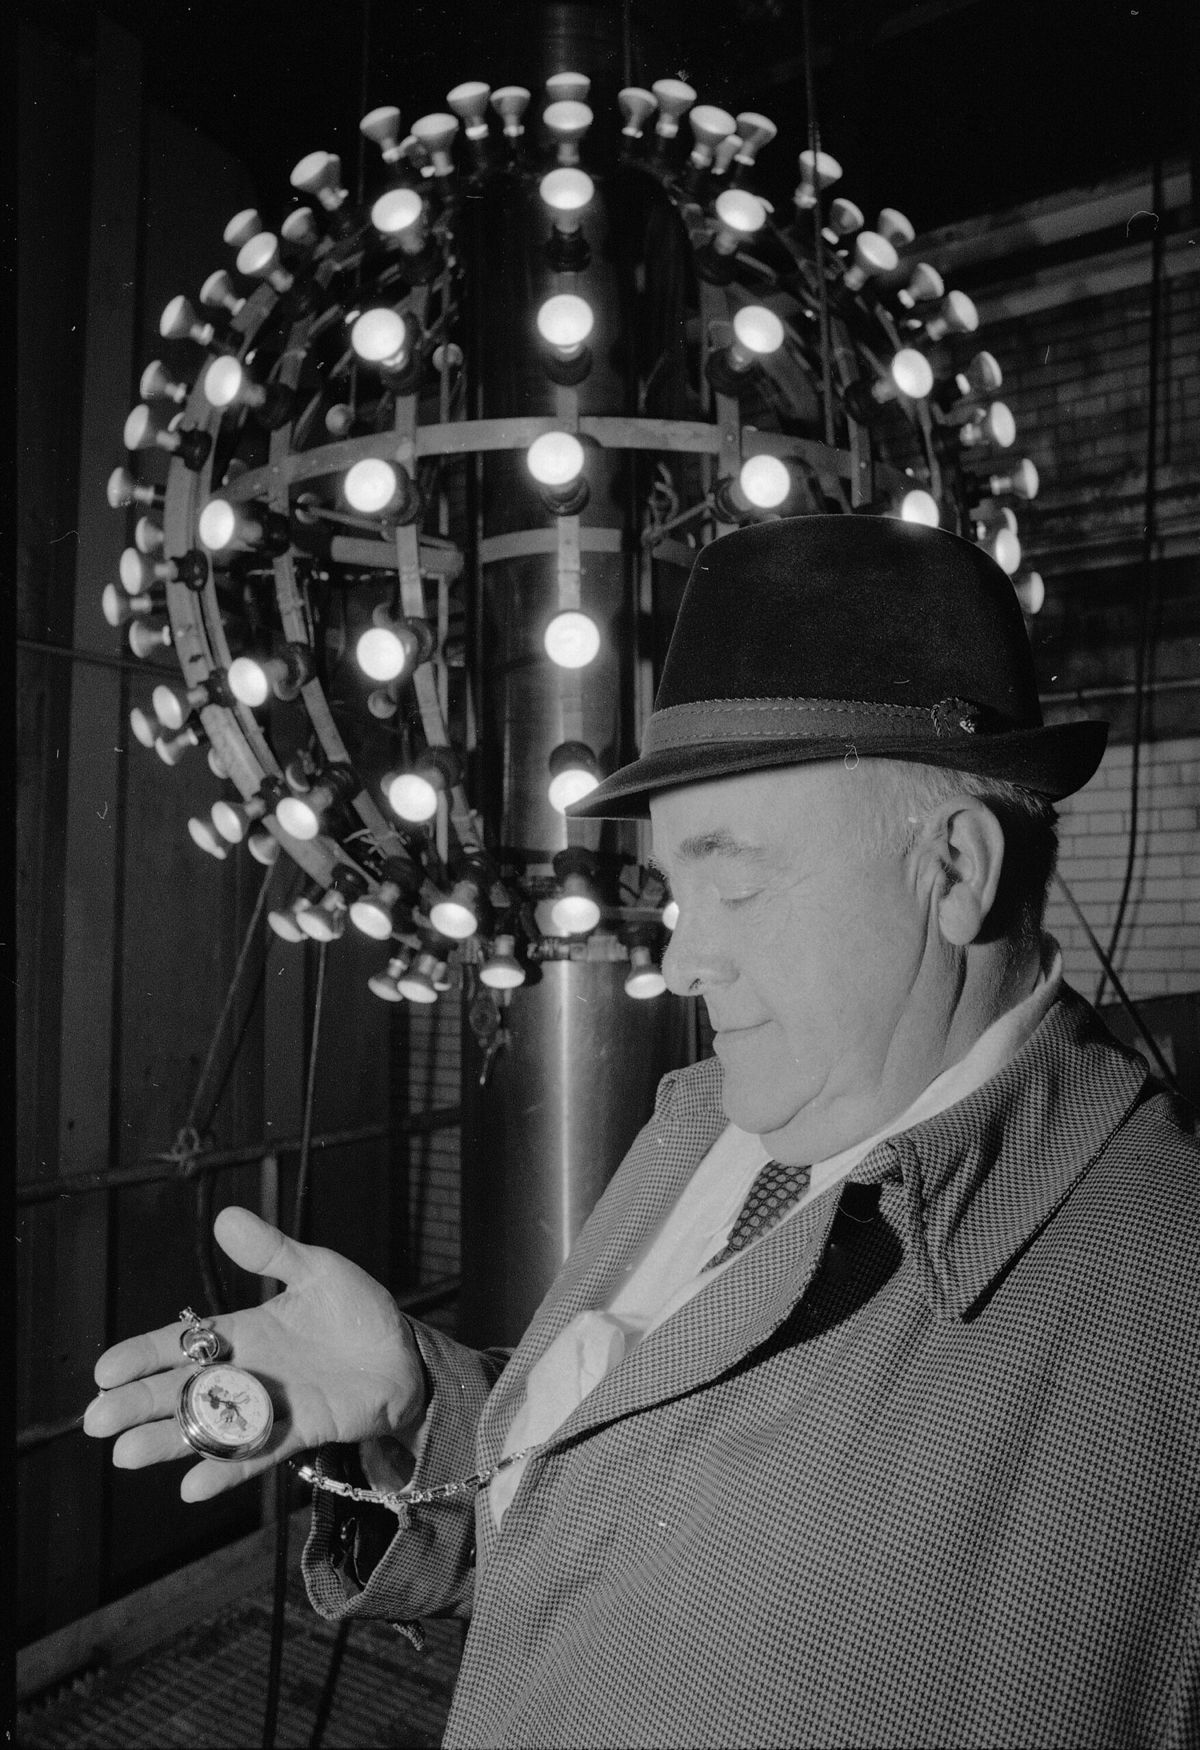 <i>David Handschuh/AP</i><br/>One design of the New Year's Ball was an aluminum cage outfitted with lightbulbs.